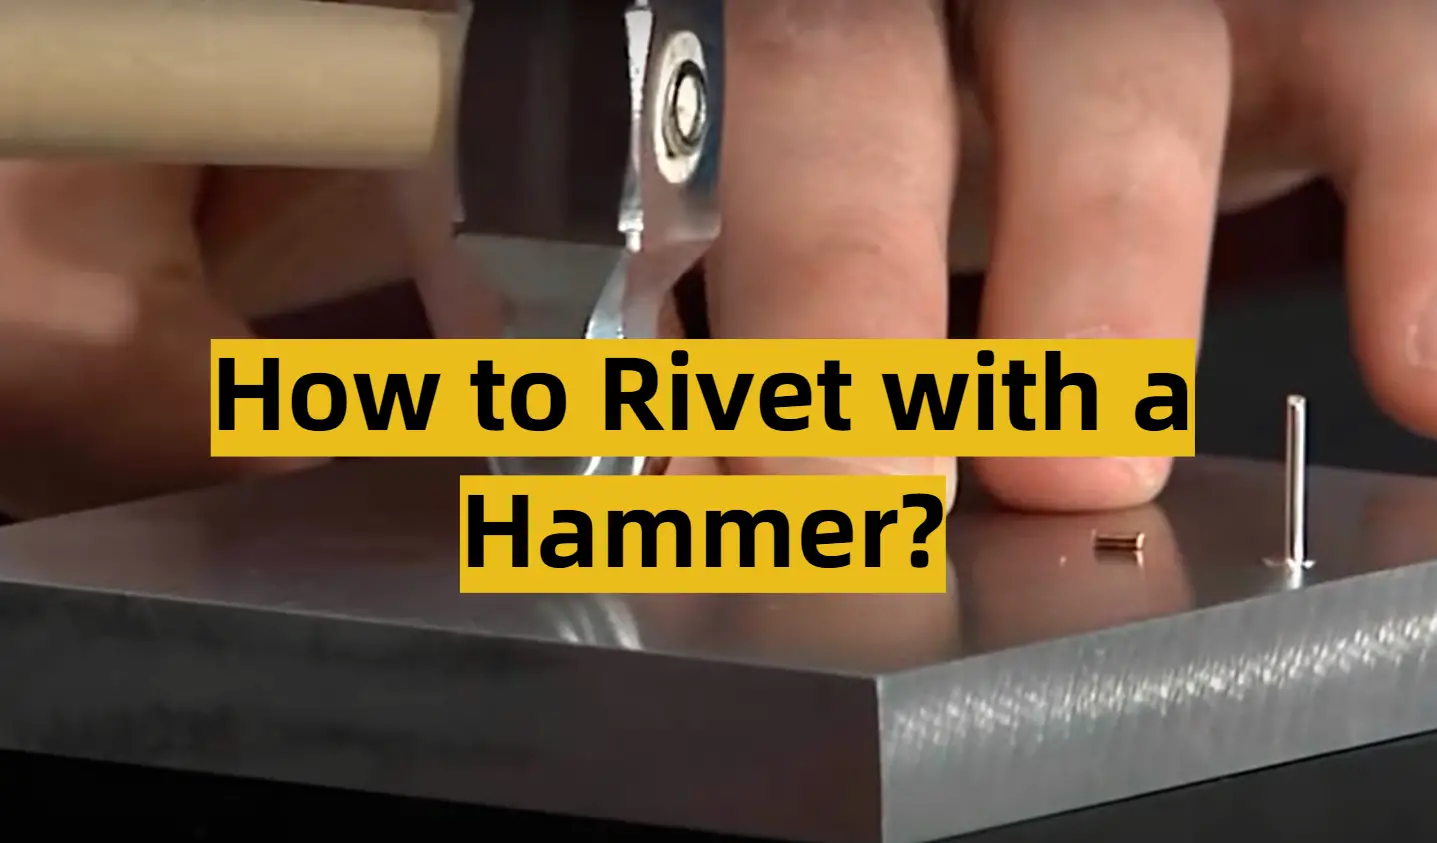 How to Rivet with a Hammer?